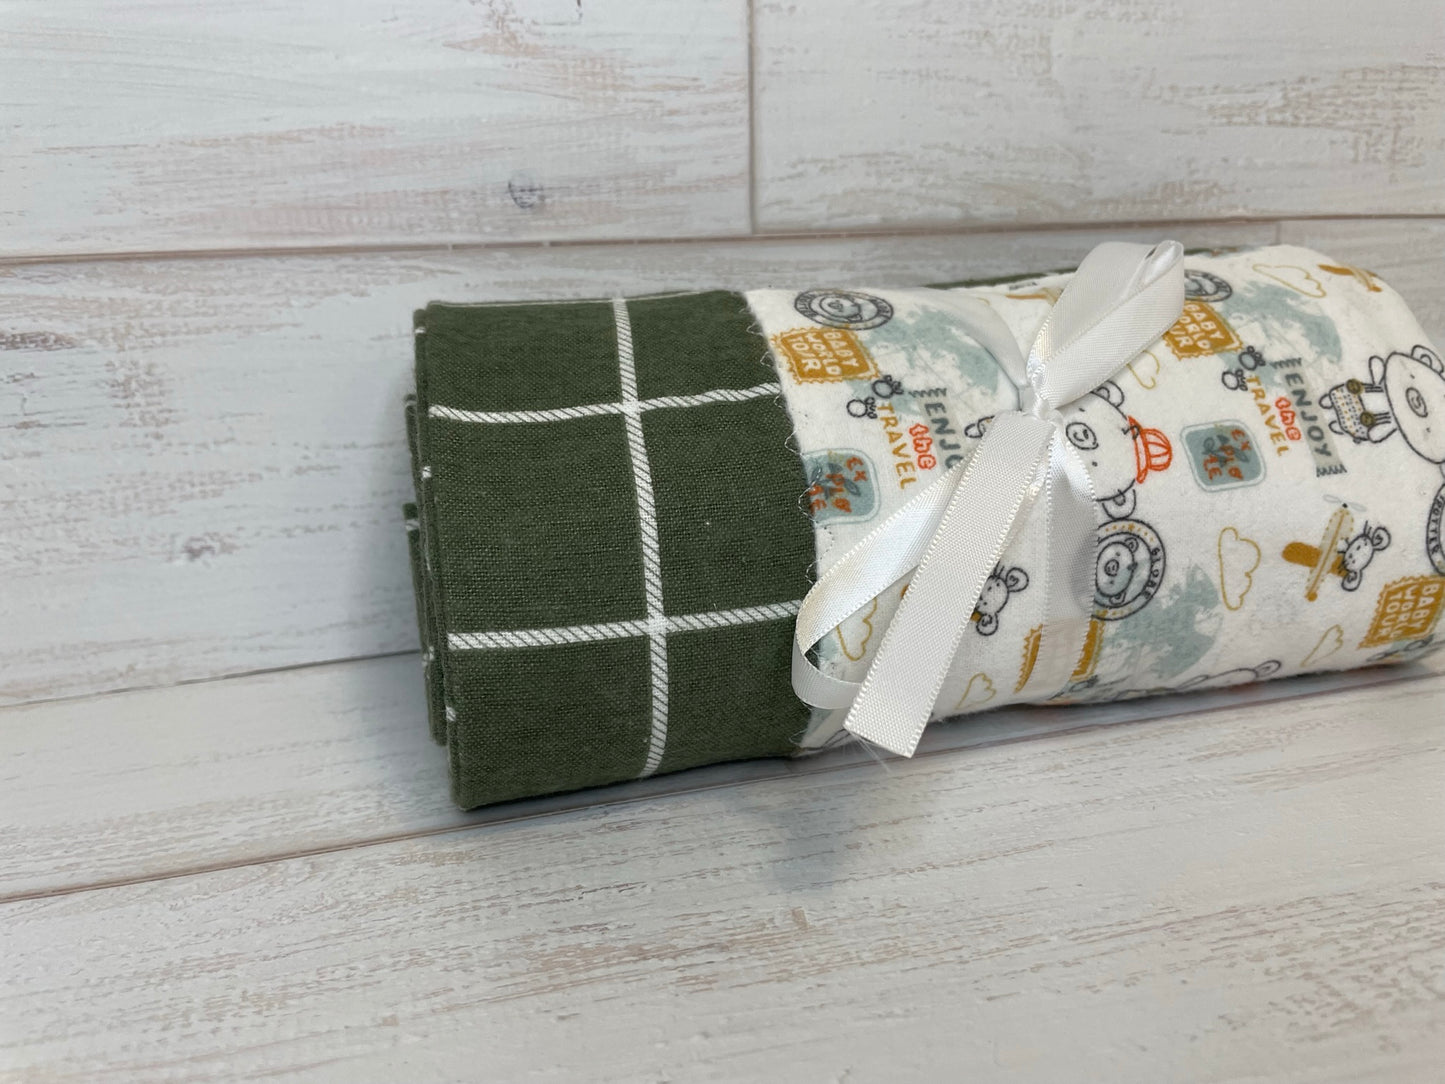 Travel Adventure with Olive Plaid Grid Swaddle Blanket